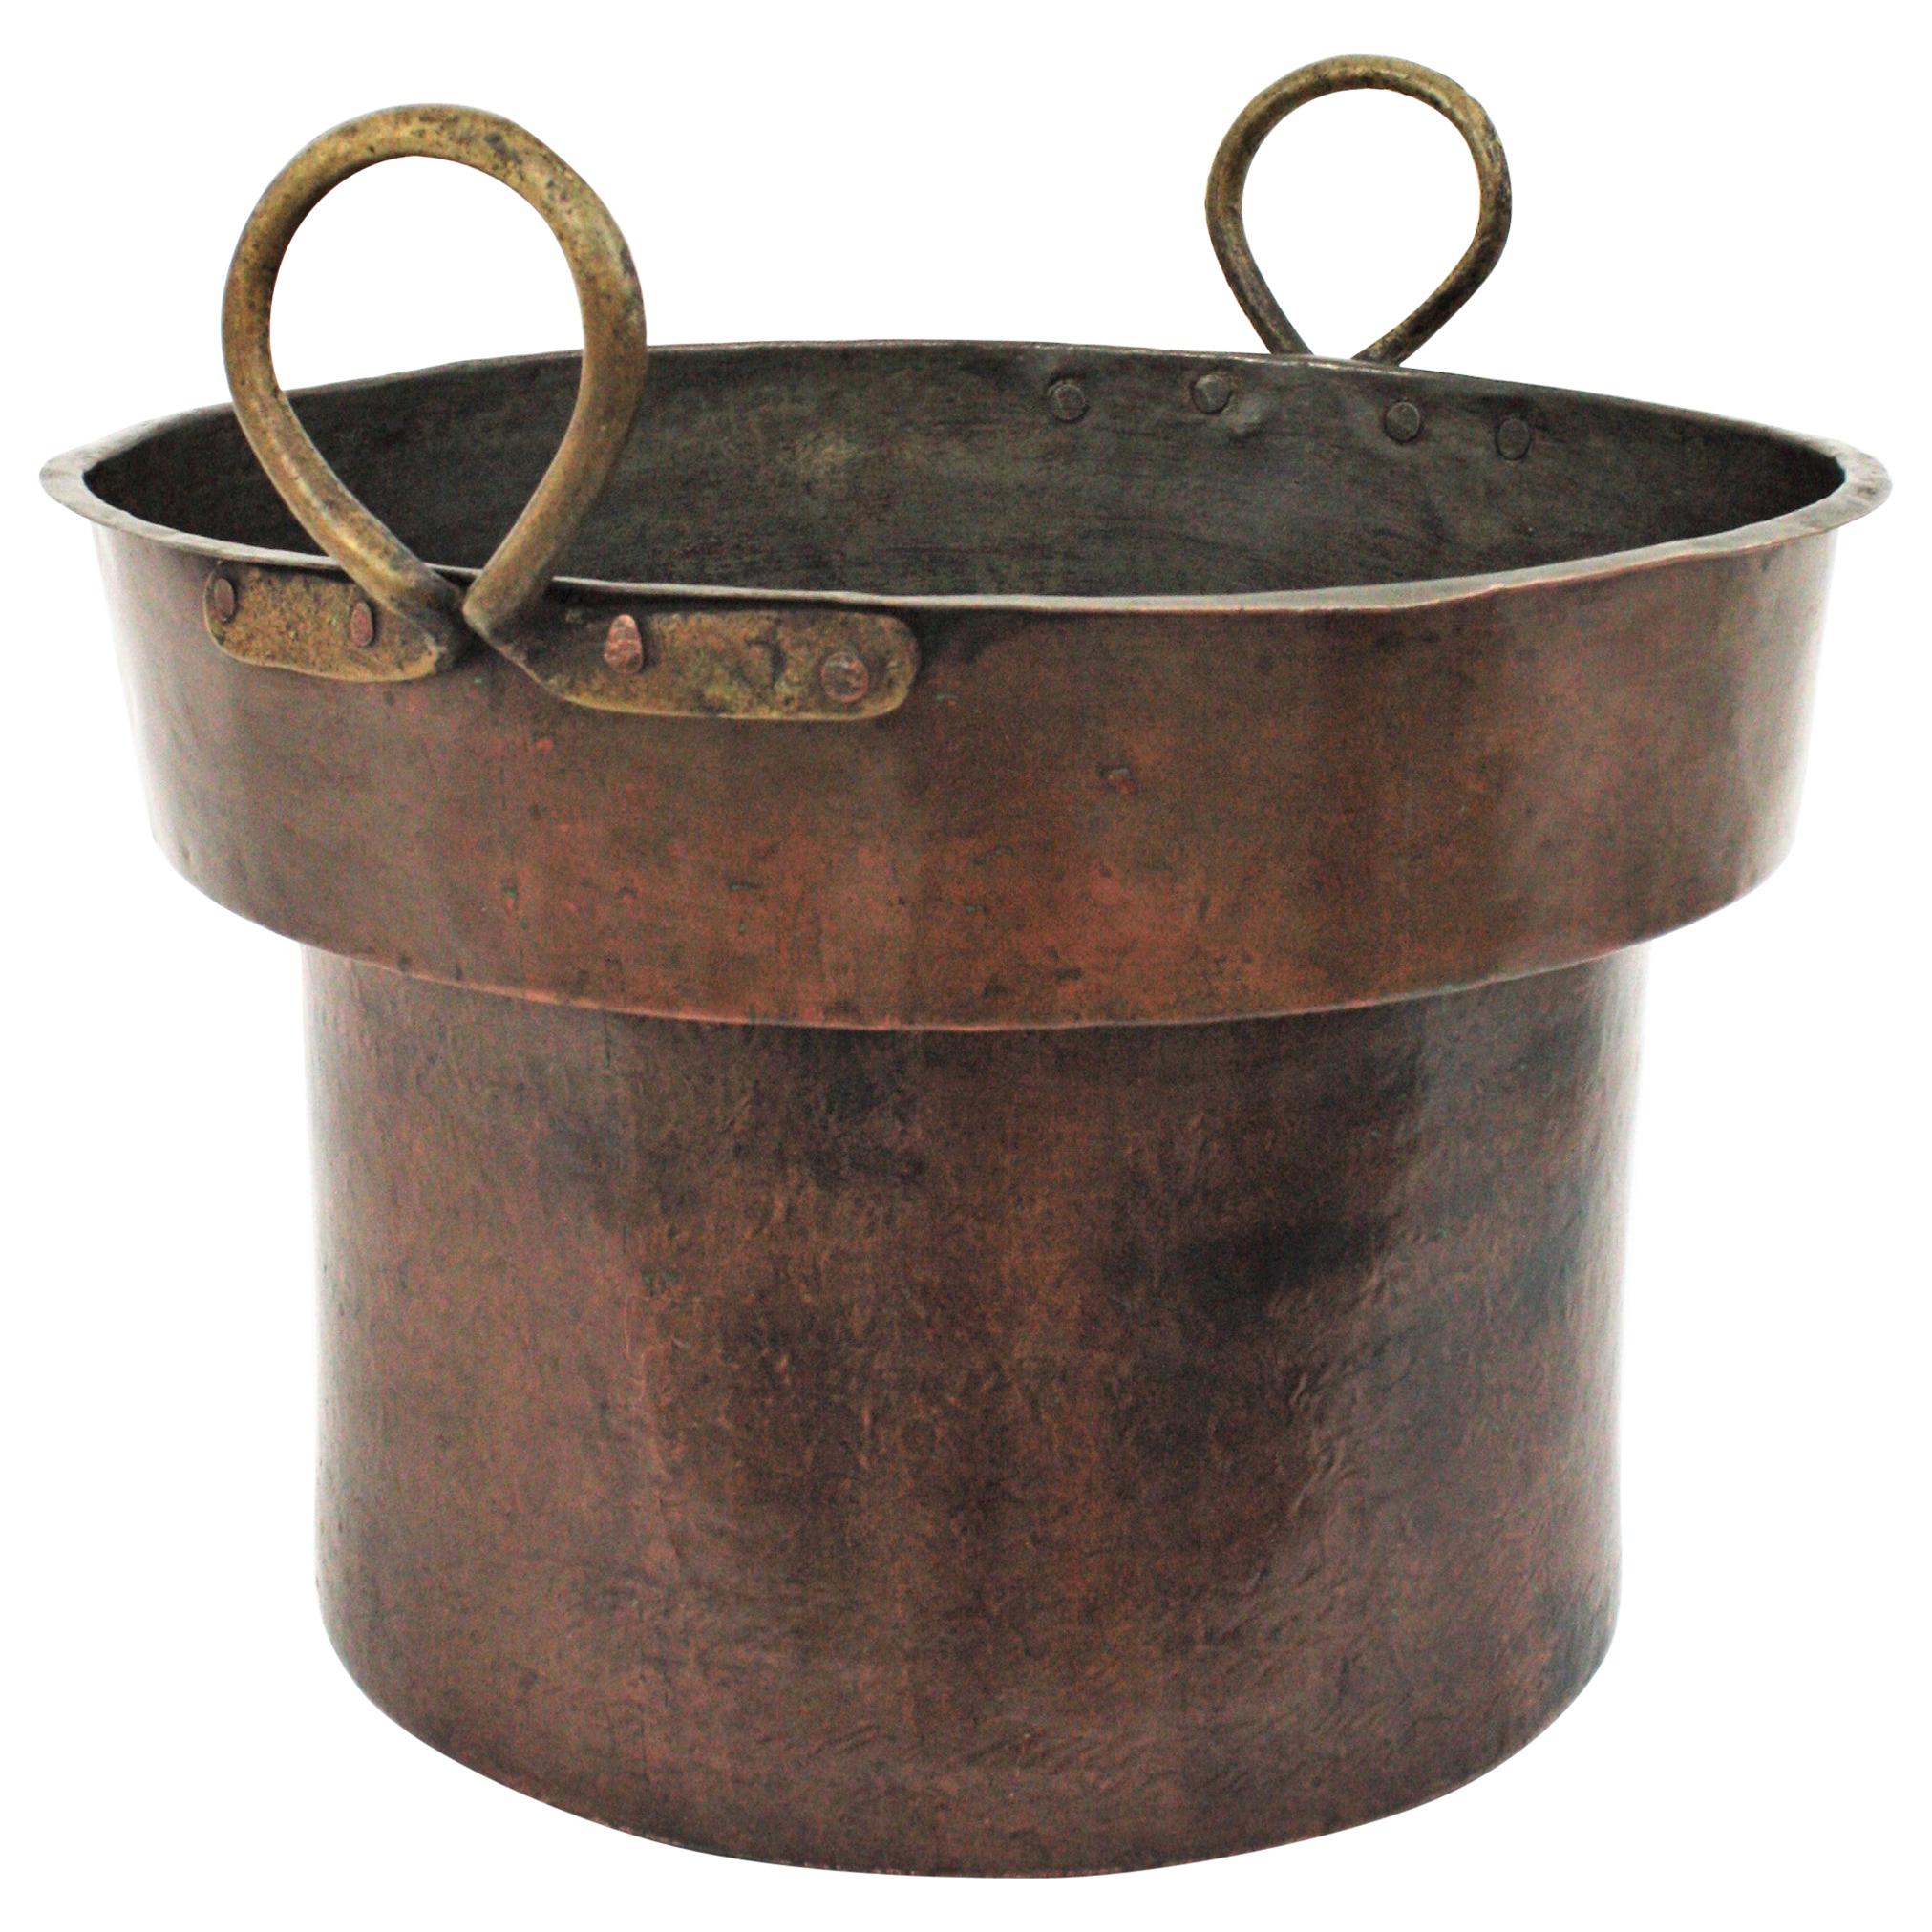 Massive 19th Century French Copper and Brass Cauldron with Handles